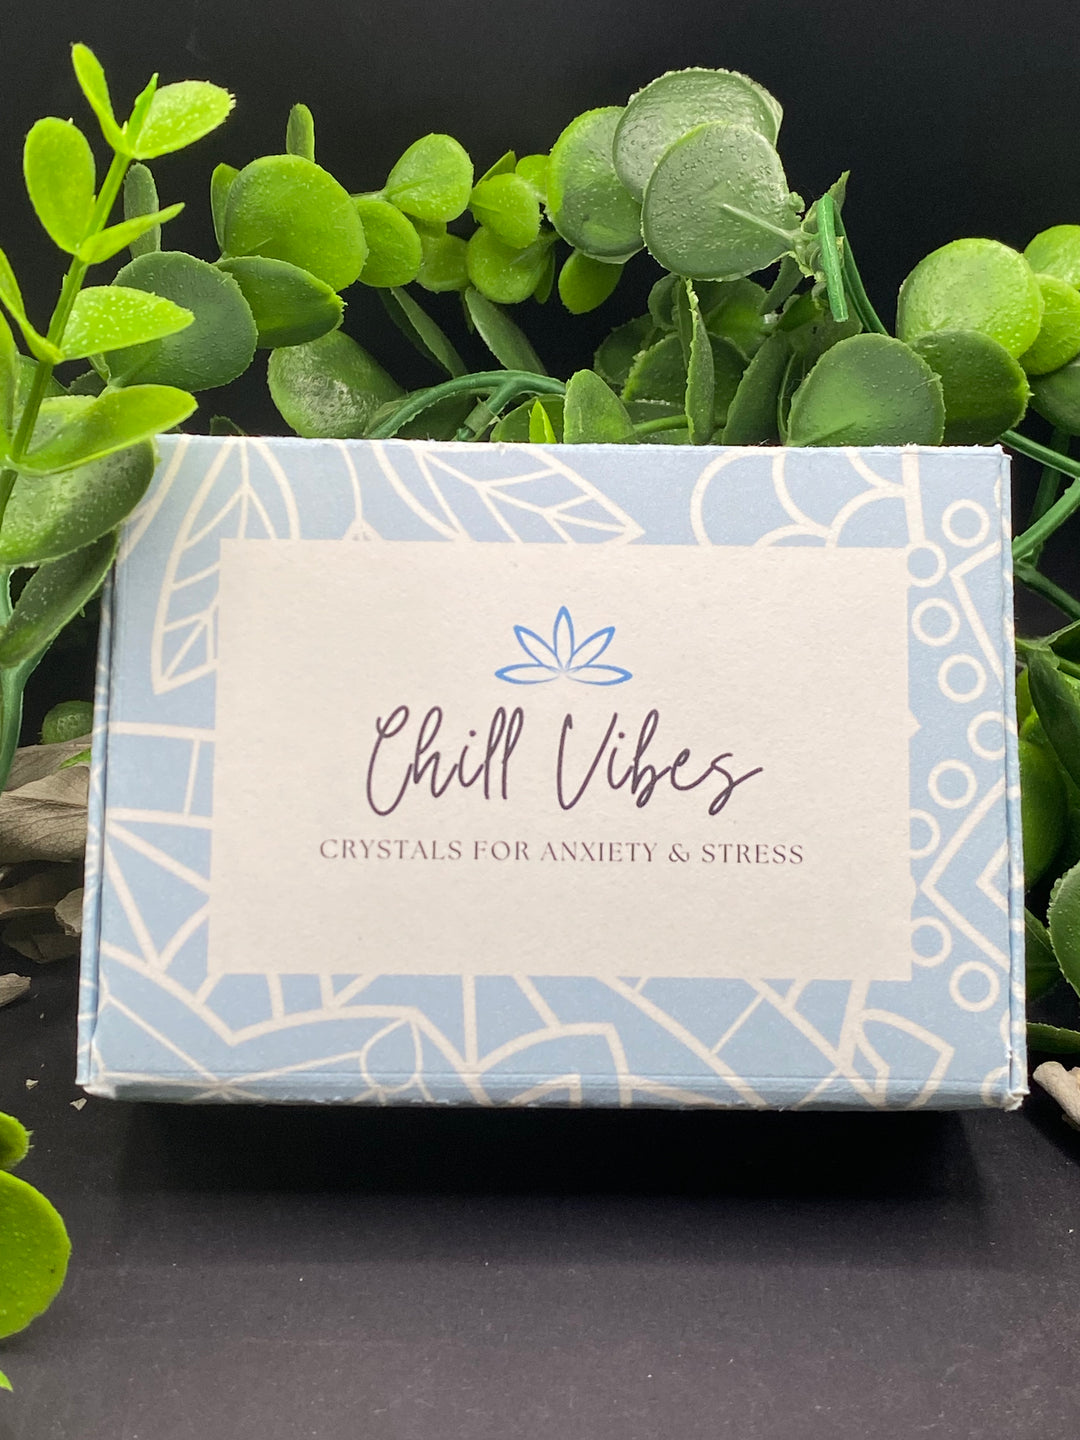 Chill Vibes Crystal Kit